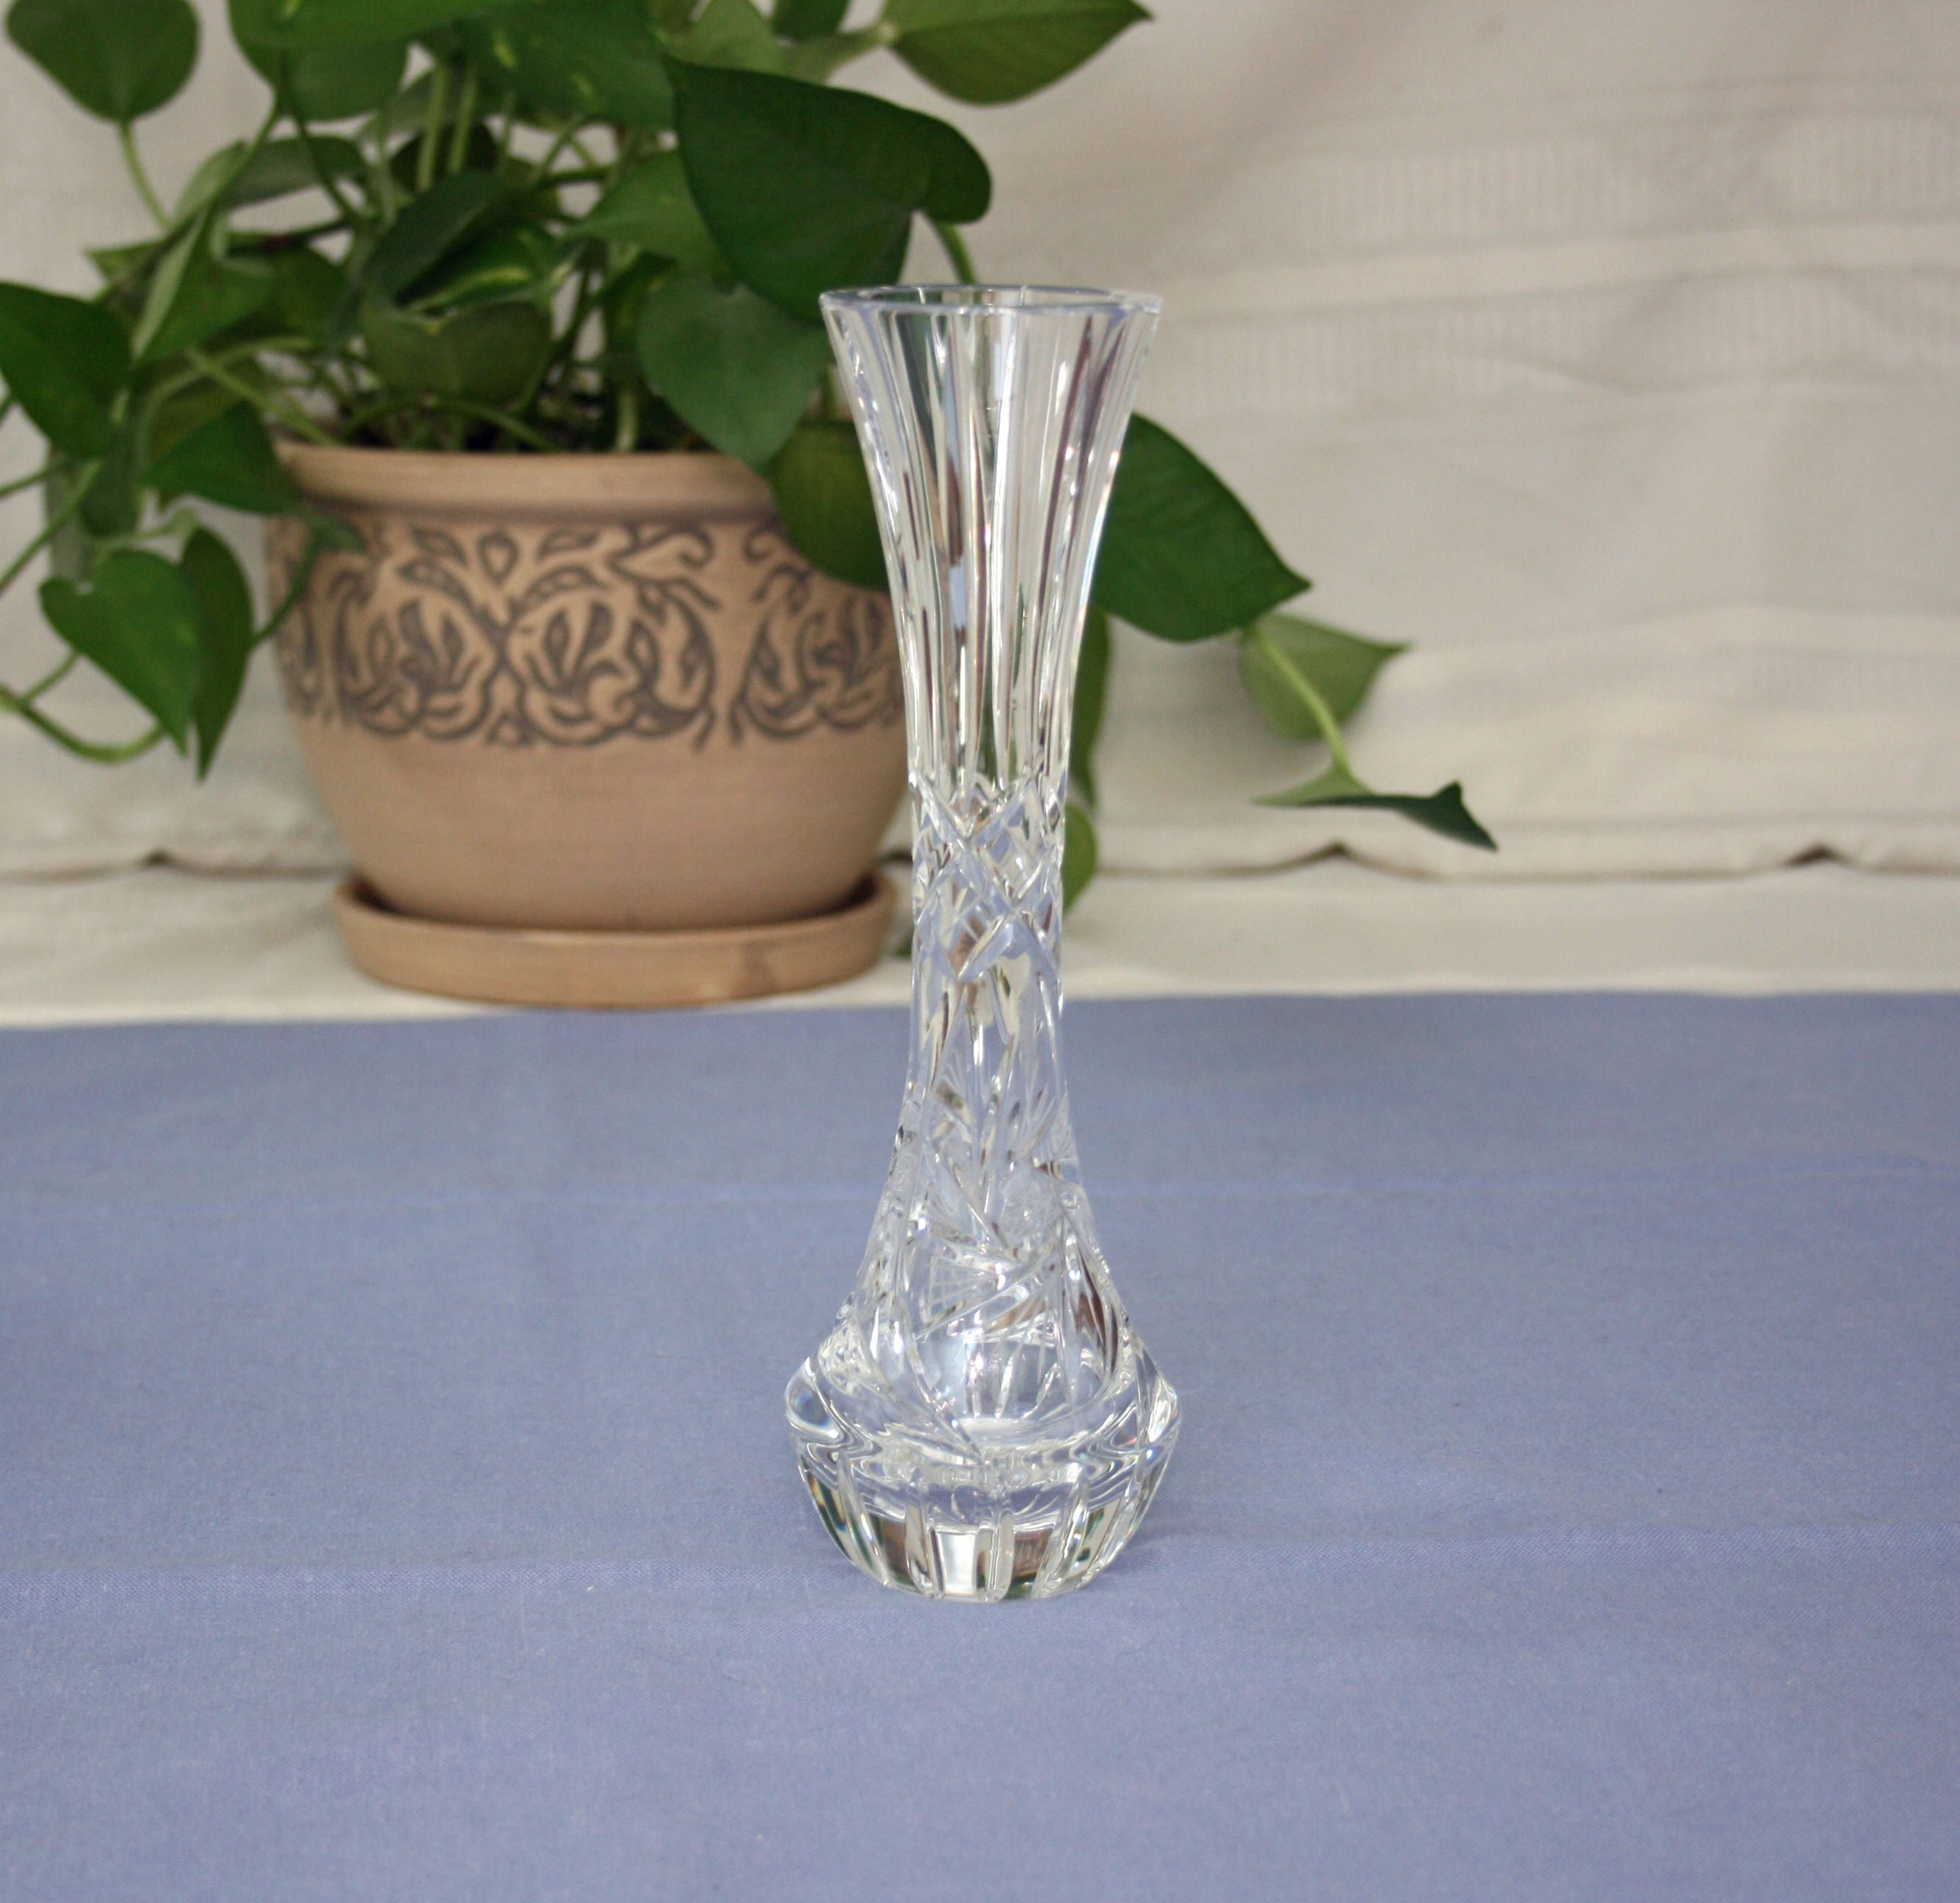 30 Famous Mikasa Vases and Bowls 2024 free download mikasa vases and bowls of vintage pair 6 inch pressed glass candlesticks with hand c pertaining to vintage lead crystal fluted bud vase hand cut swirled star pinwheel flower glass vase home 